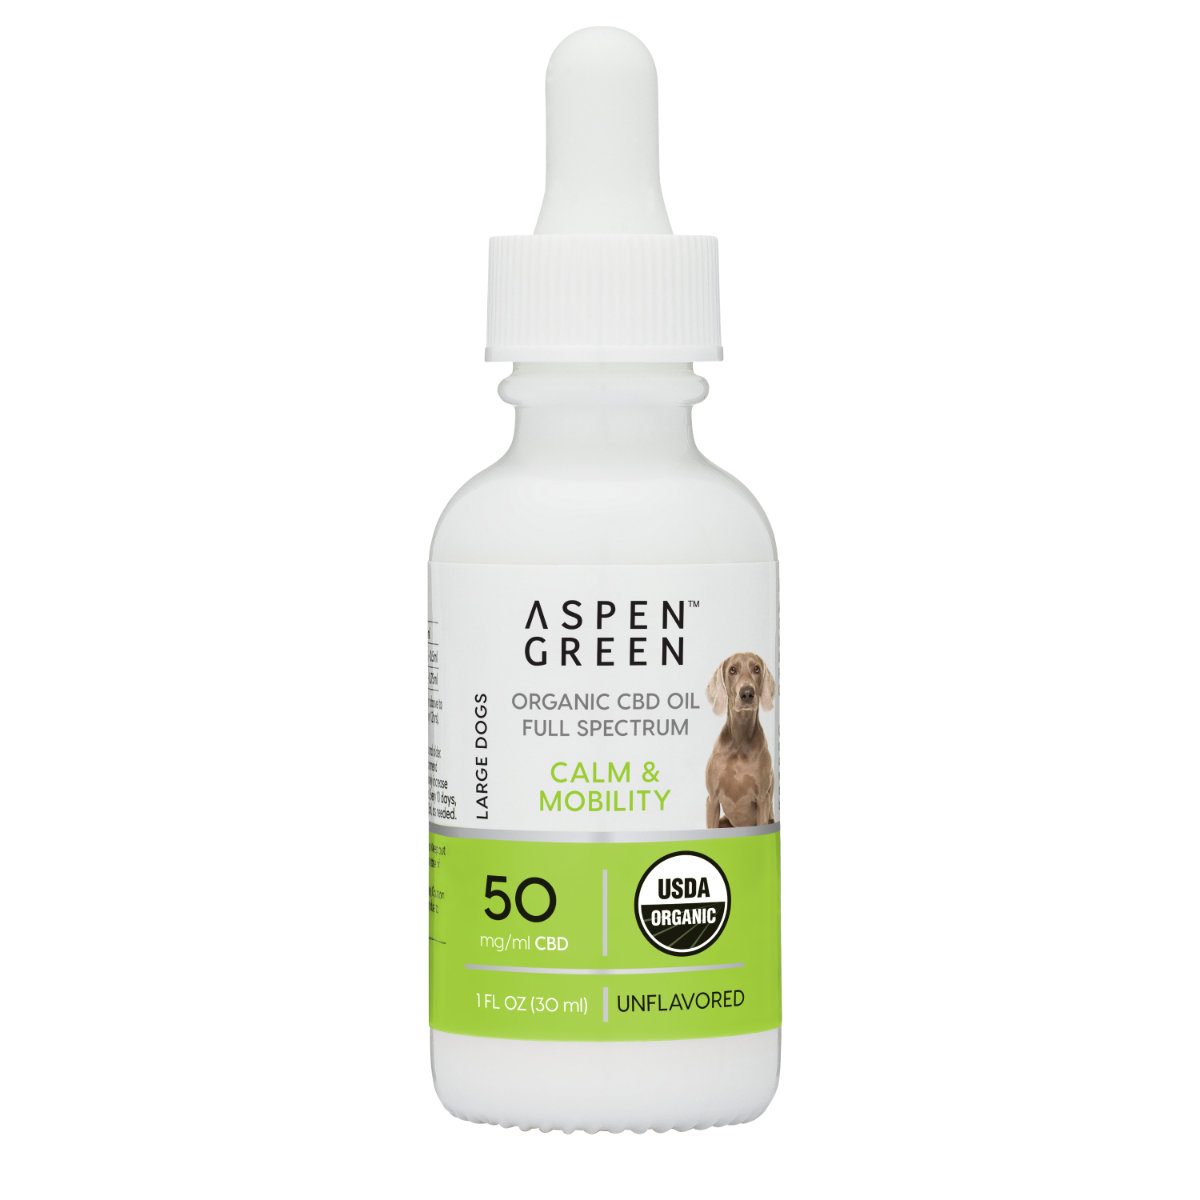 Aspen Green Calm & Mobility Large Dogs Full Spectrum CBD Oil Tincture - USDA Certified Organic, Unflavored